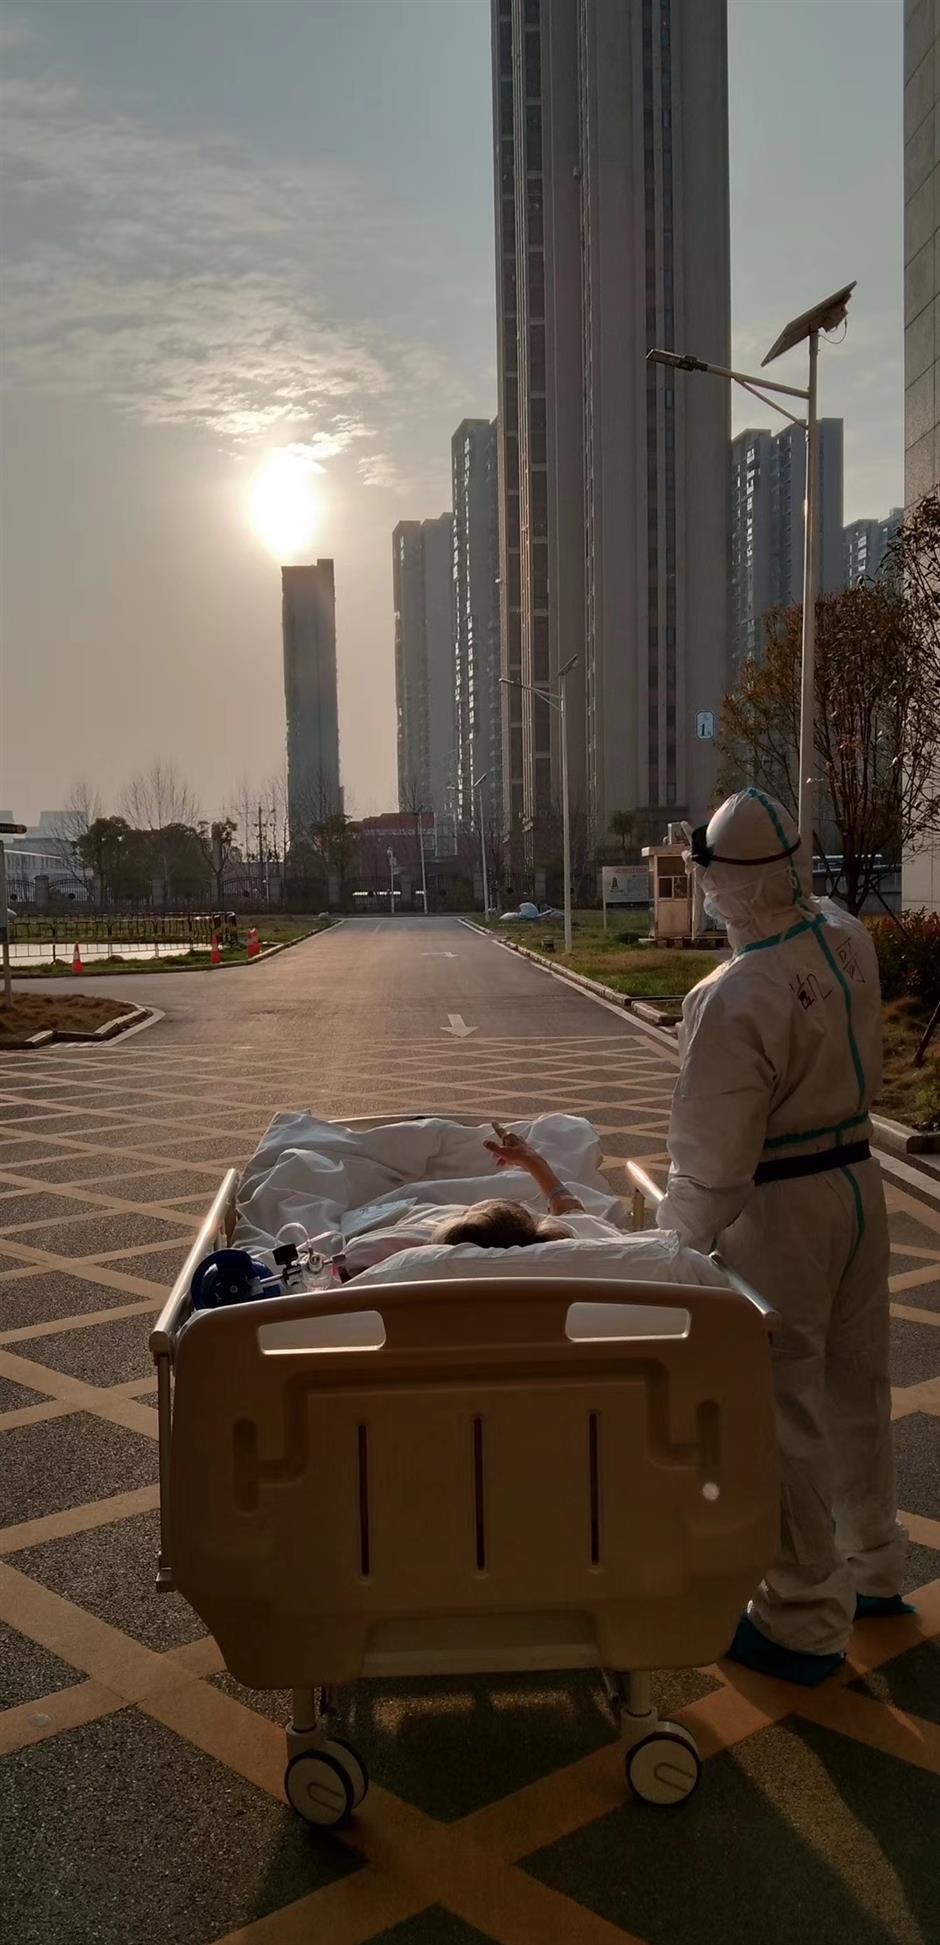 Patient in viral sunset photo plays violin to send off Shanghai medics